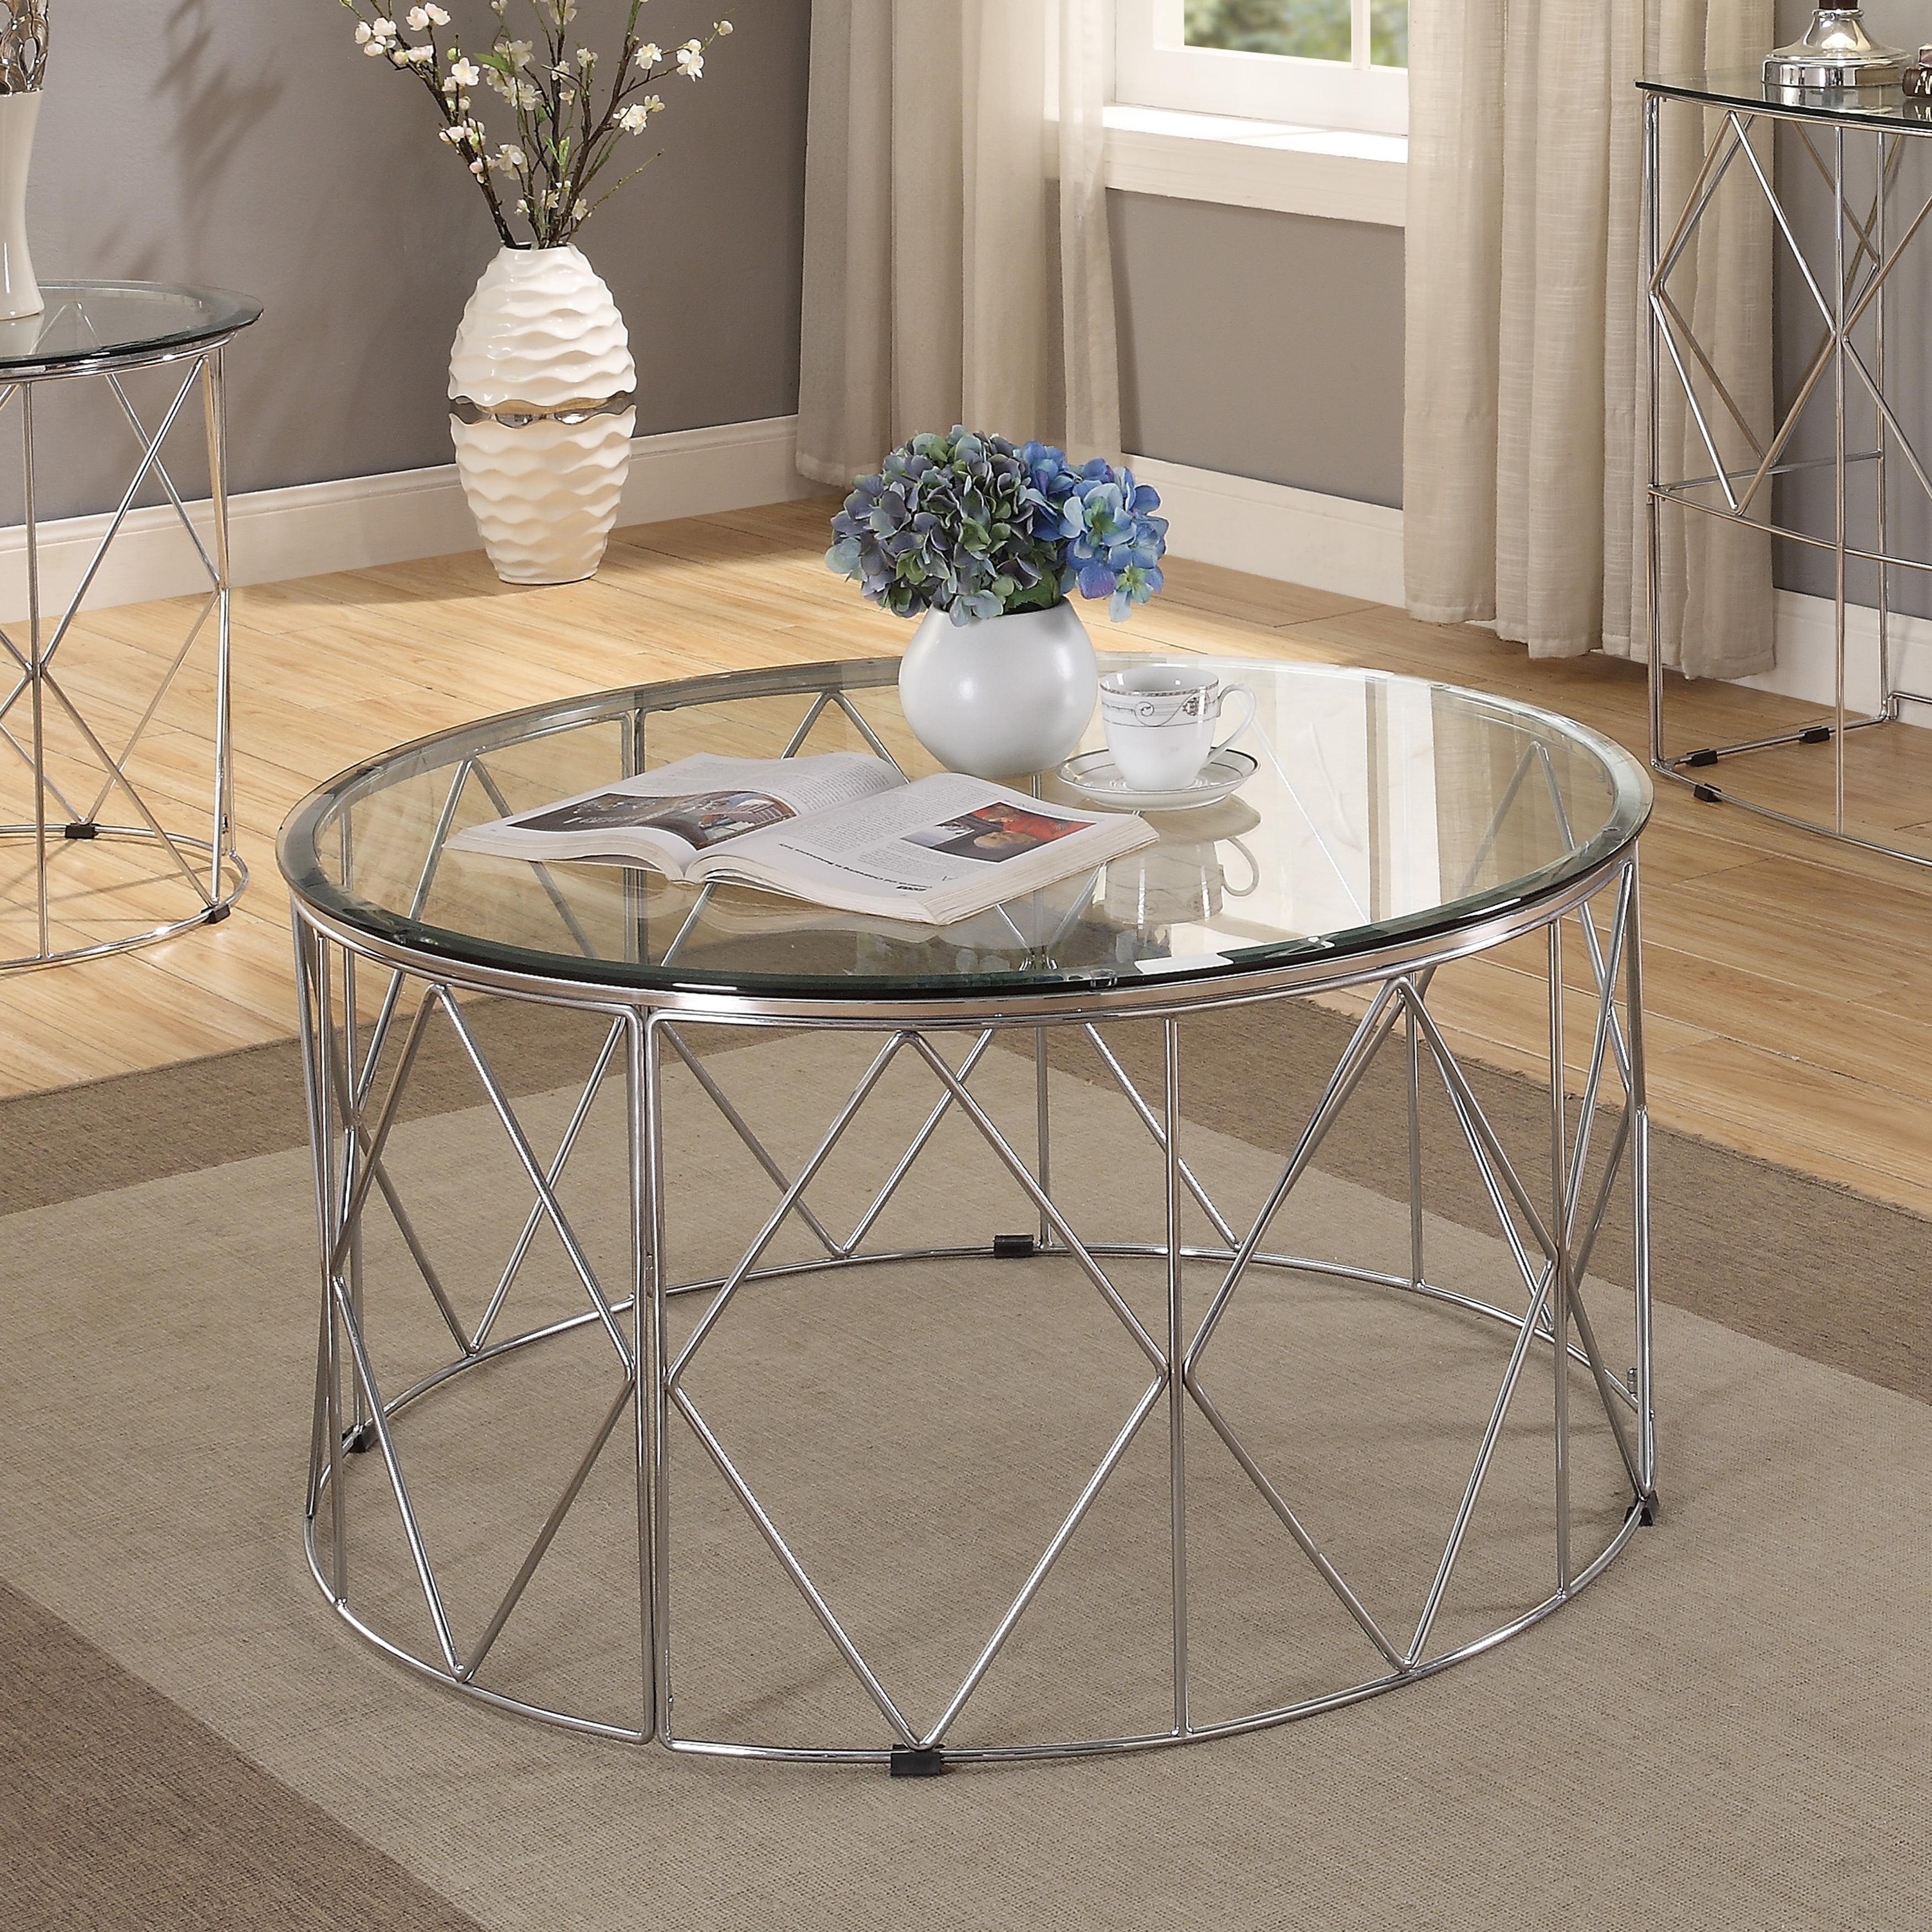 Furniture Of America Eila Contemporary Round Glass Coffee Table Overstock 30972090